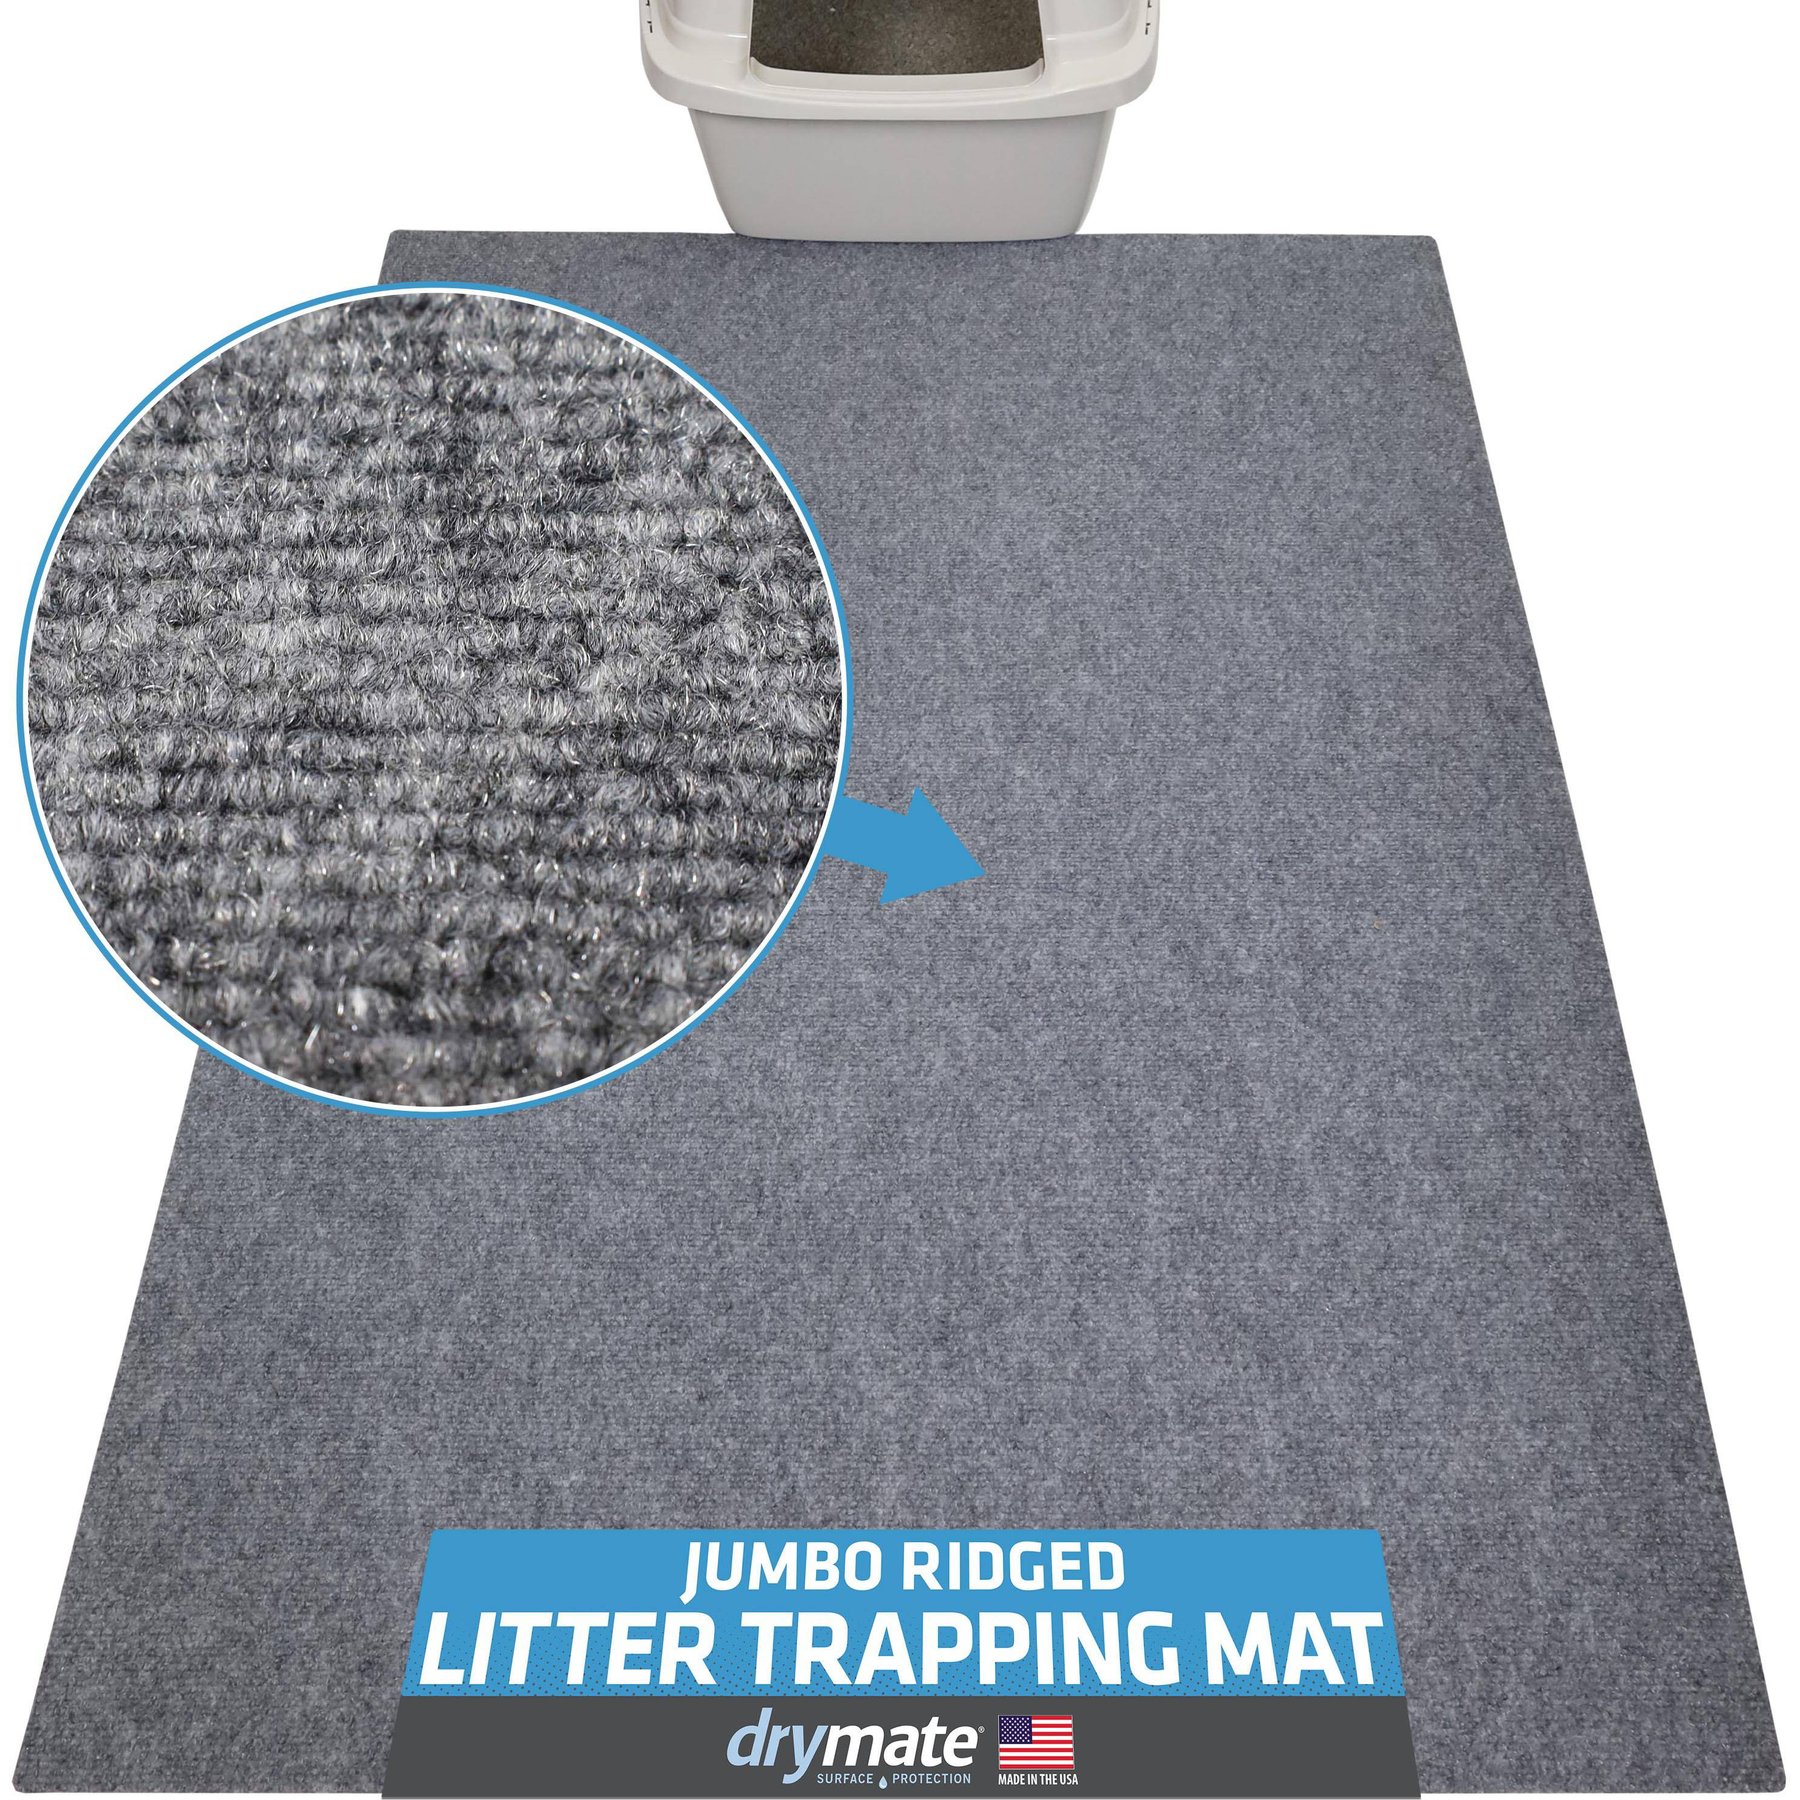 Litter Mats and Accessories – Catit USA - Official Catit Brand Store